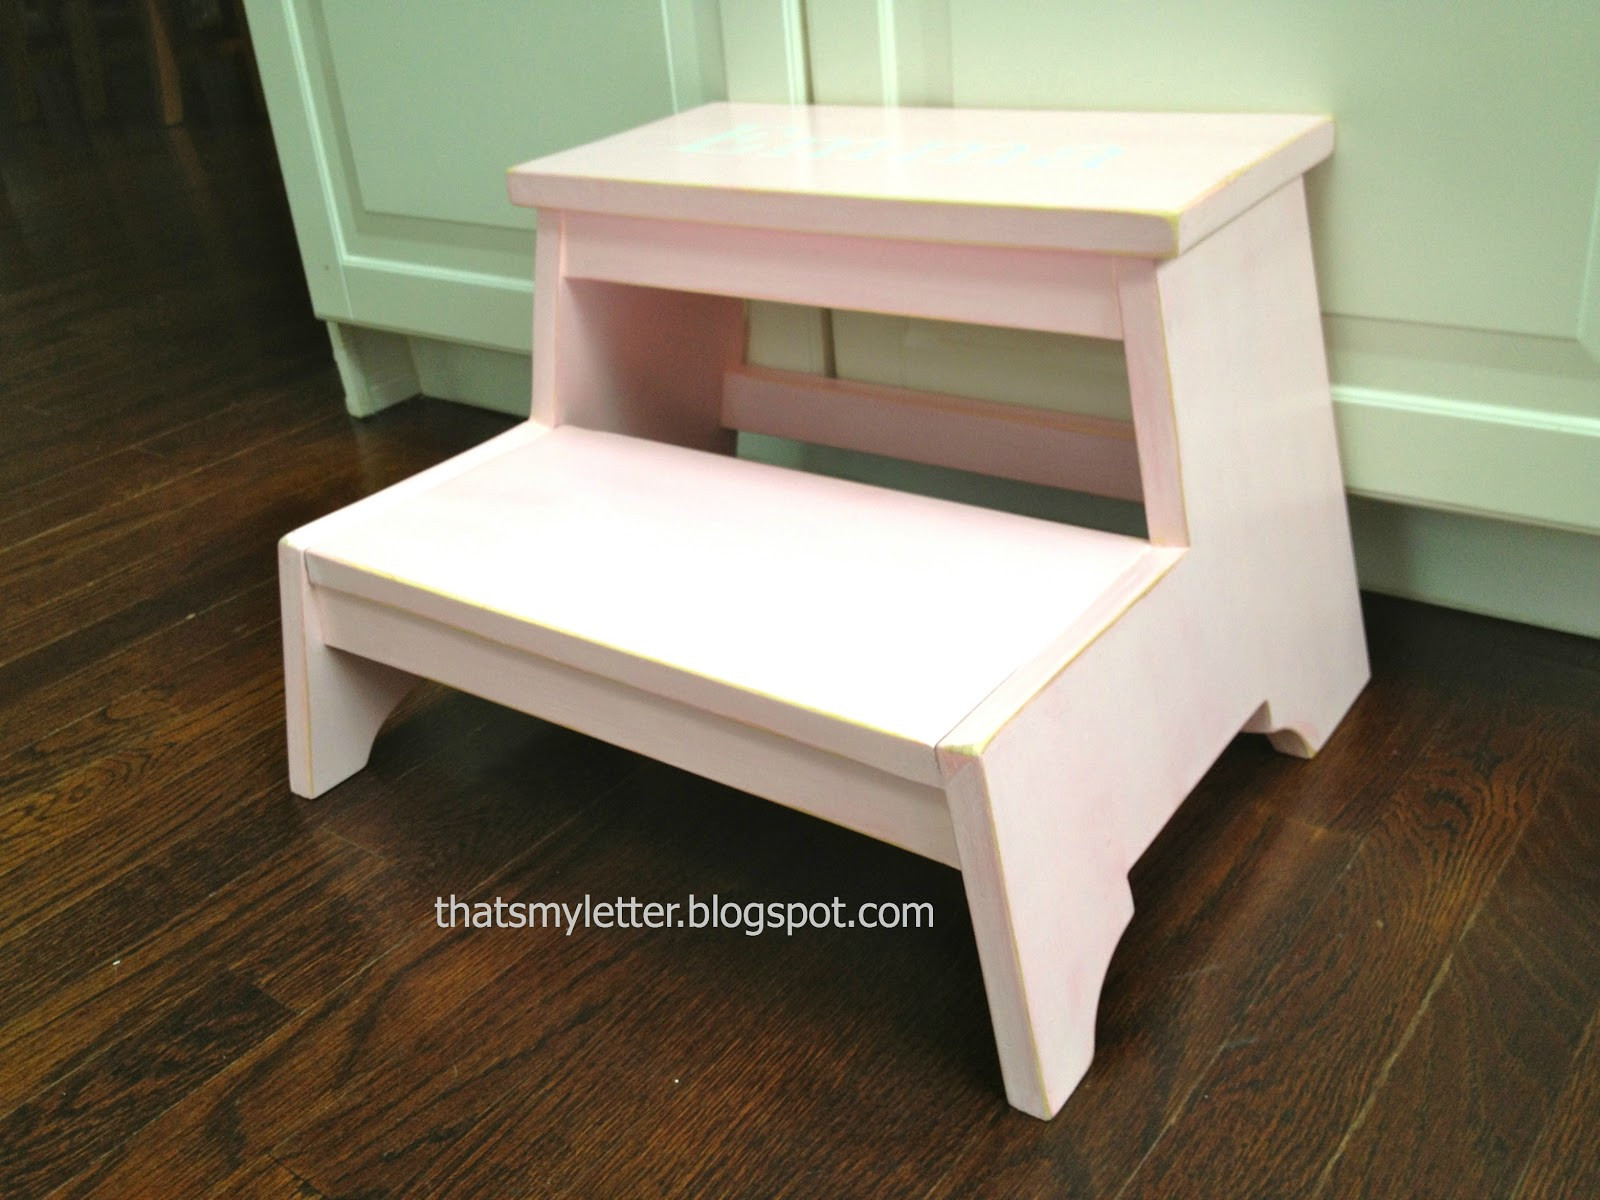 DIY Toddler Step Stool
 That s My Letter "K" is for Kids Step Stool